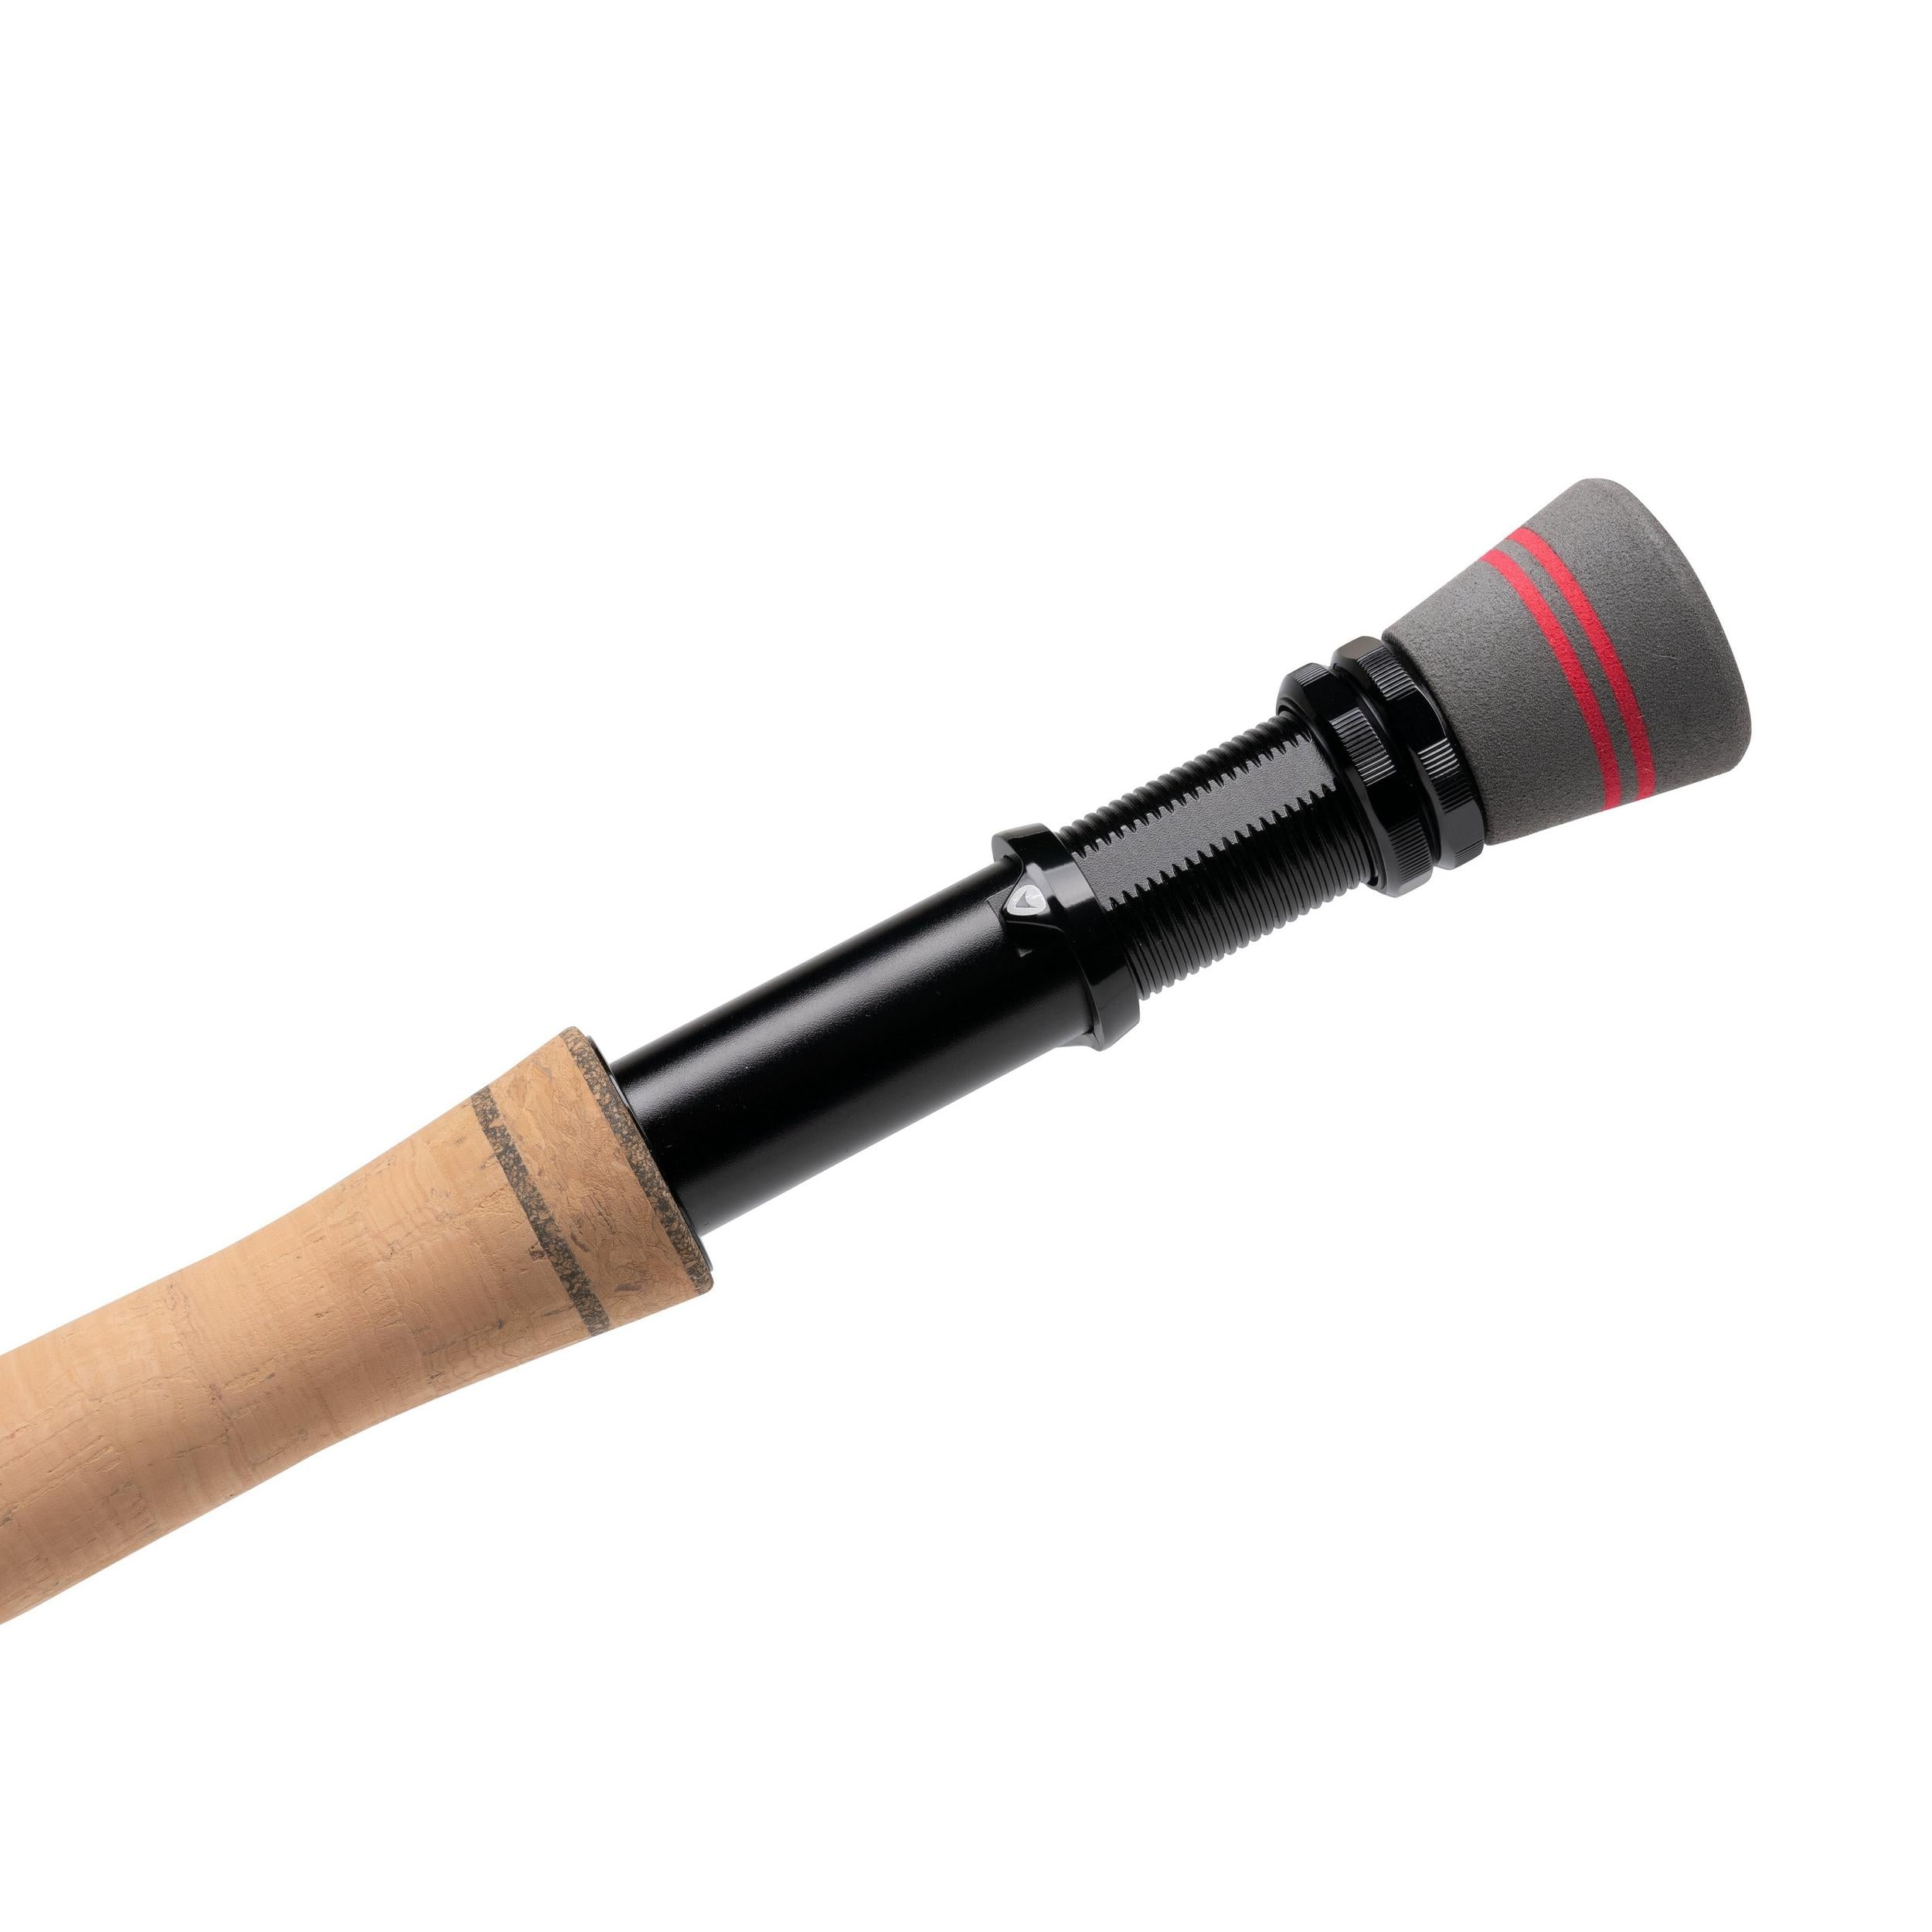 GREYS WING SALTWATER FLY RODS - NEW '23